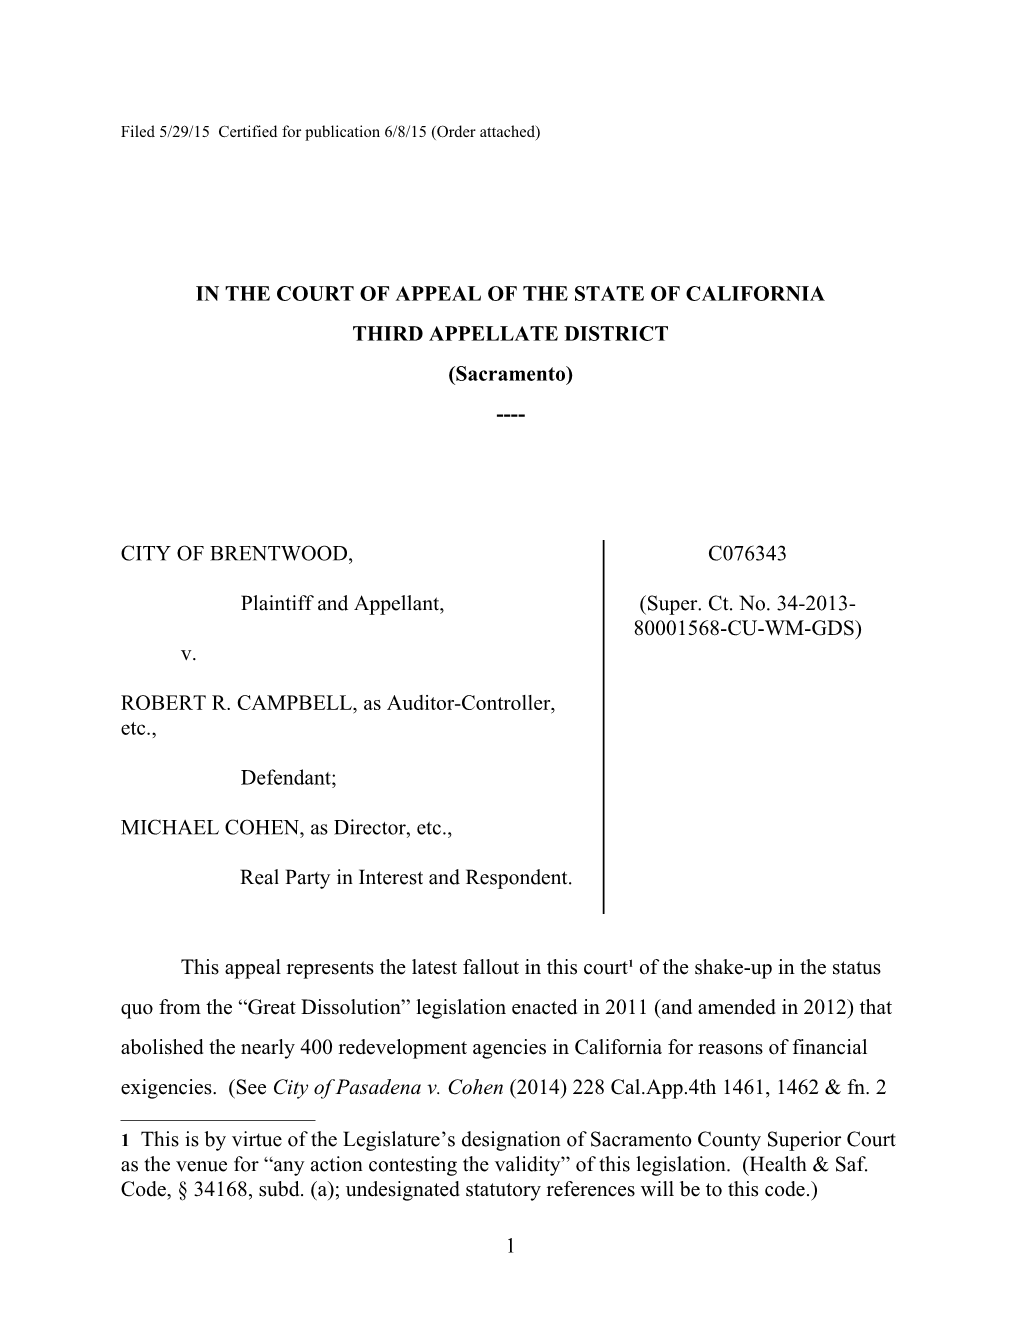 In the Court of Appeal of the State of California s2